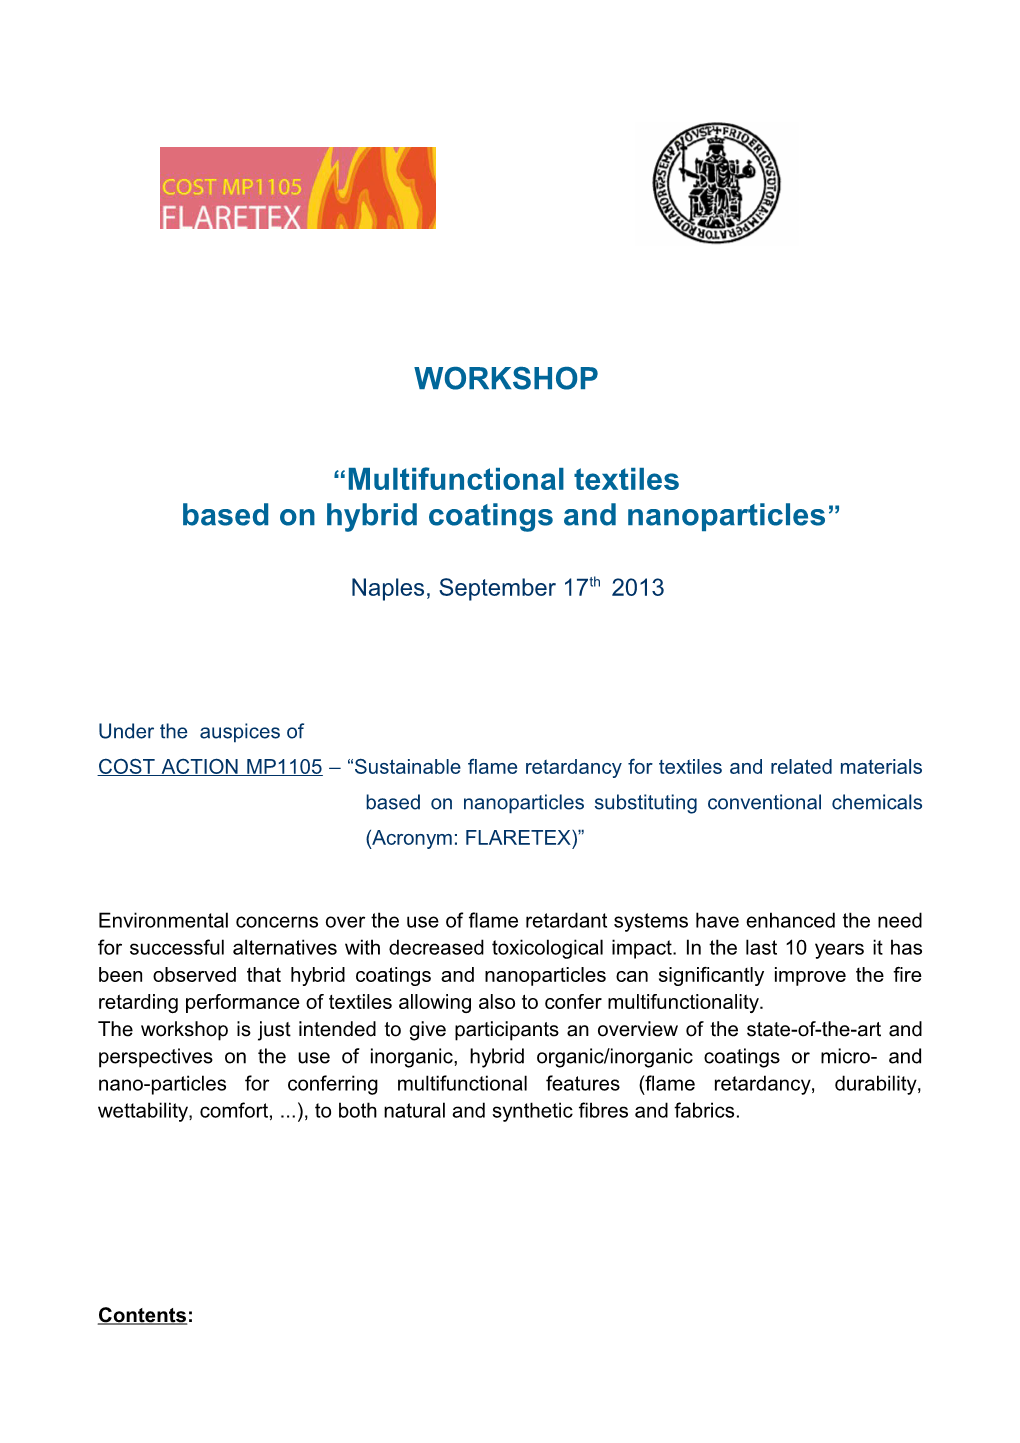 Based on Hybrid Coatings and Nanoparticles